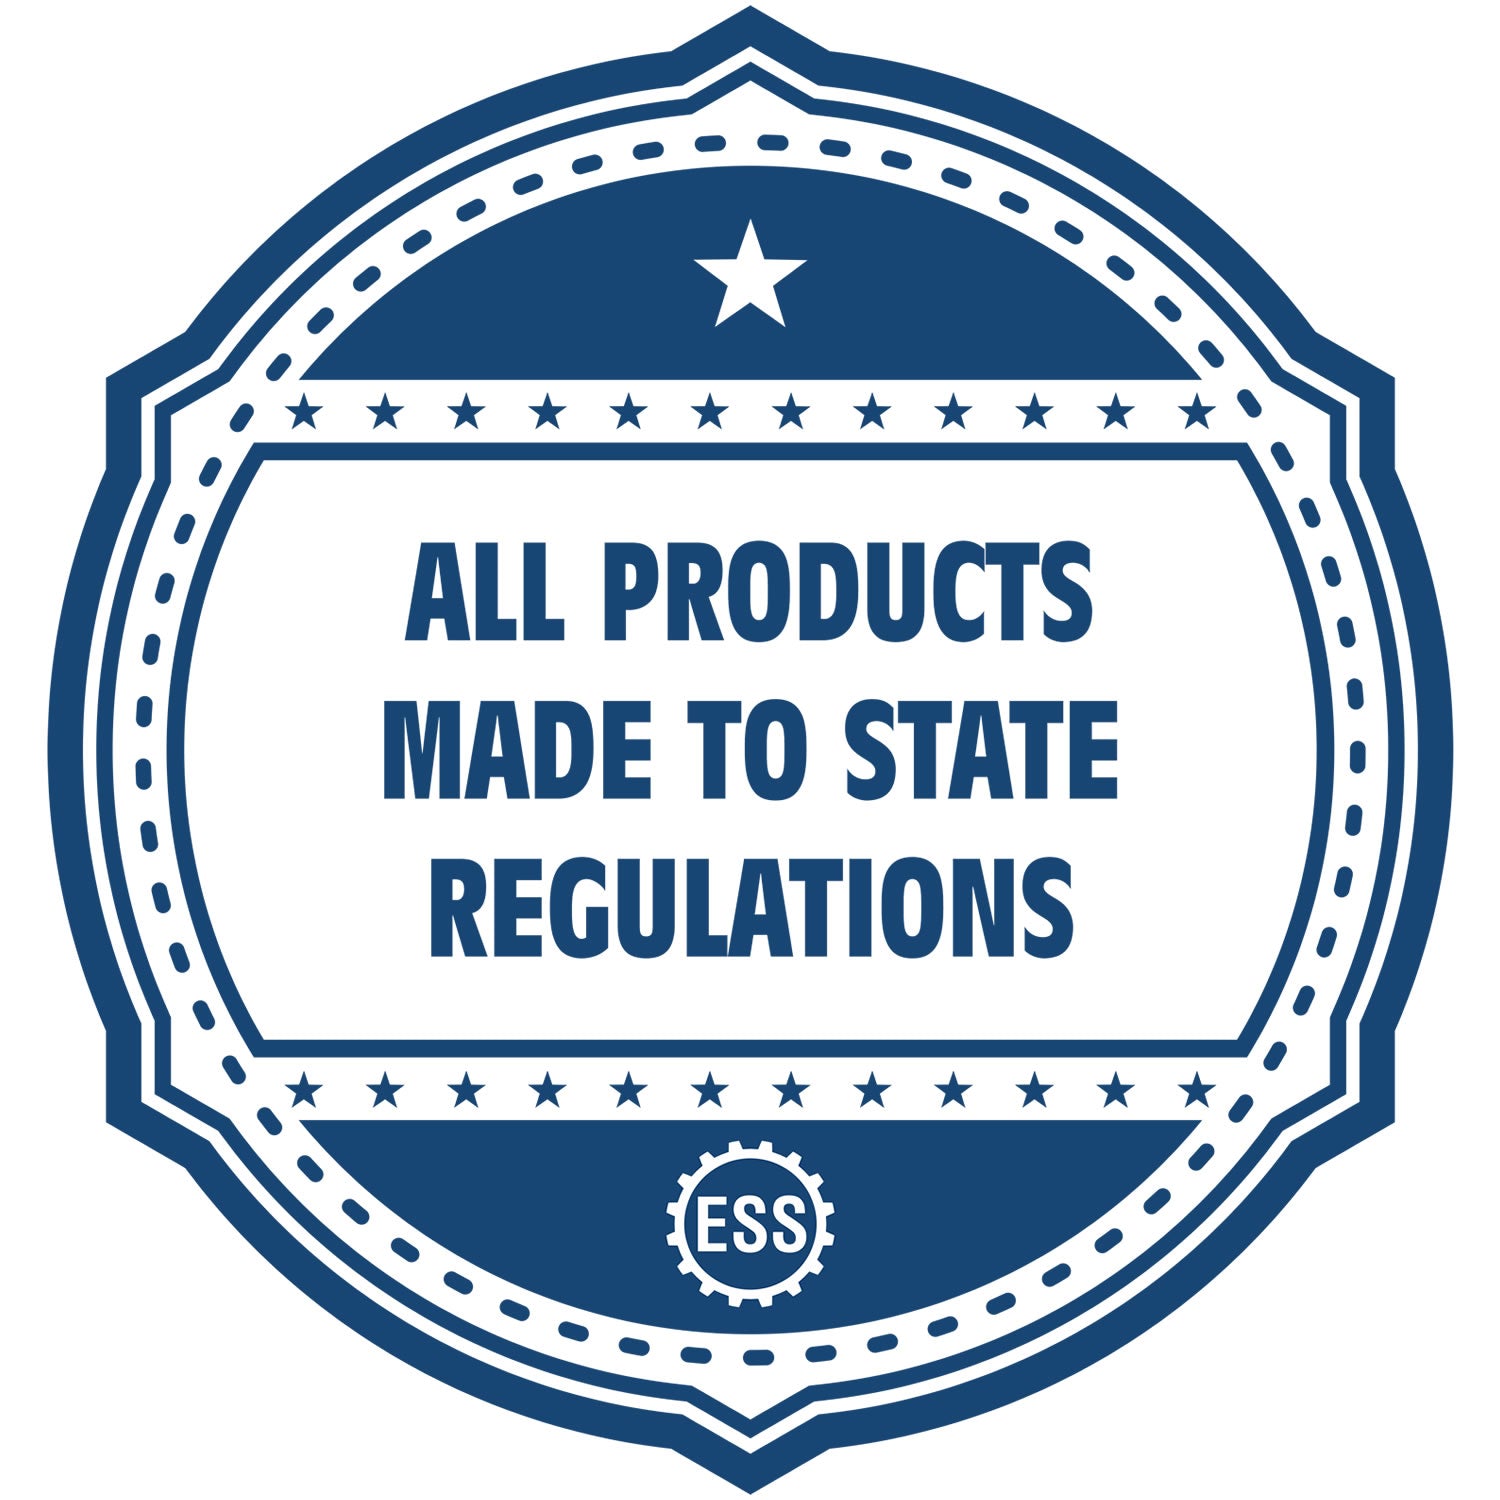 An icon or badge element for the Arkansas Desk Architect Embossing Seal showing that this product is made in compliance with state regulations.